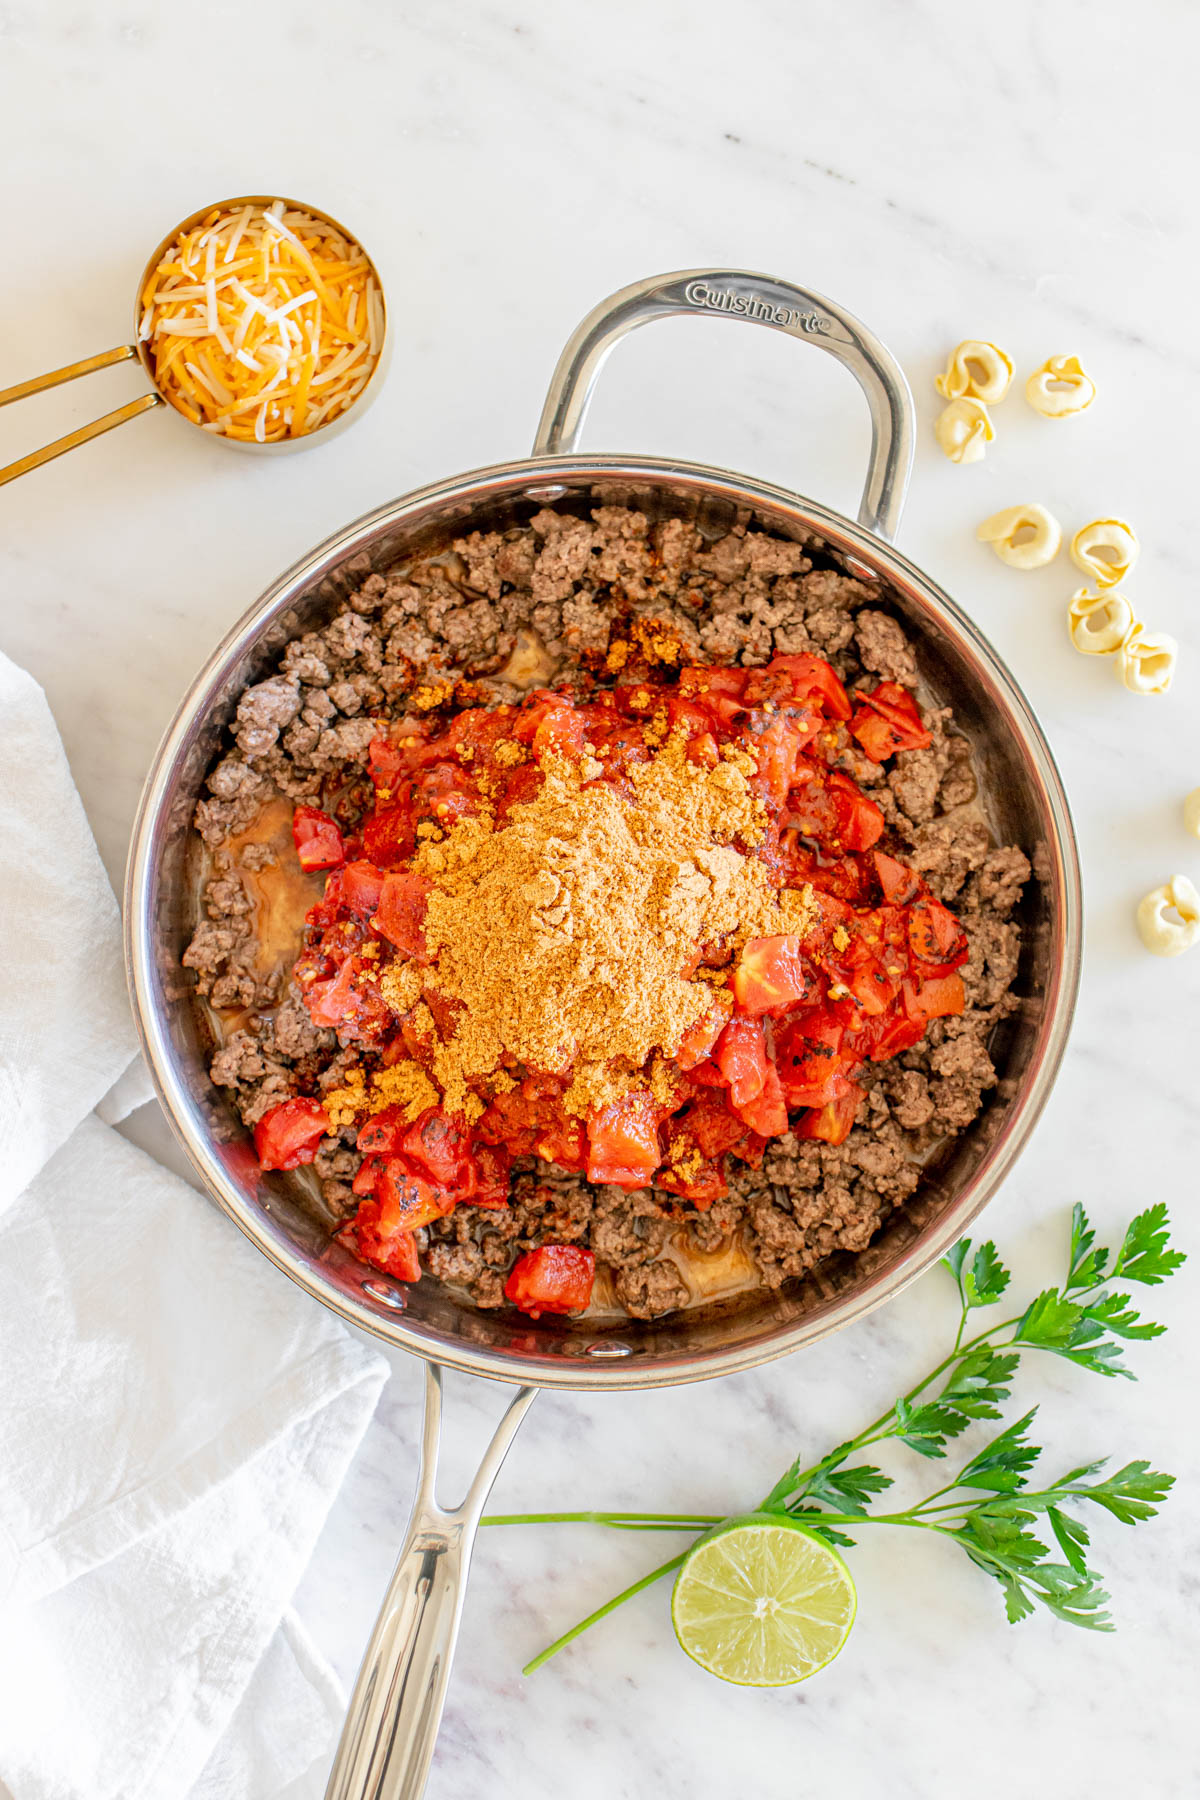 A skillet filled with a ground beef, tomatoes and spices